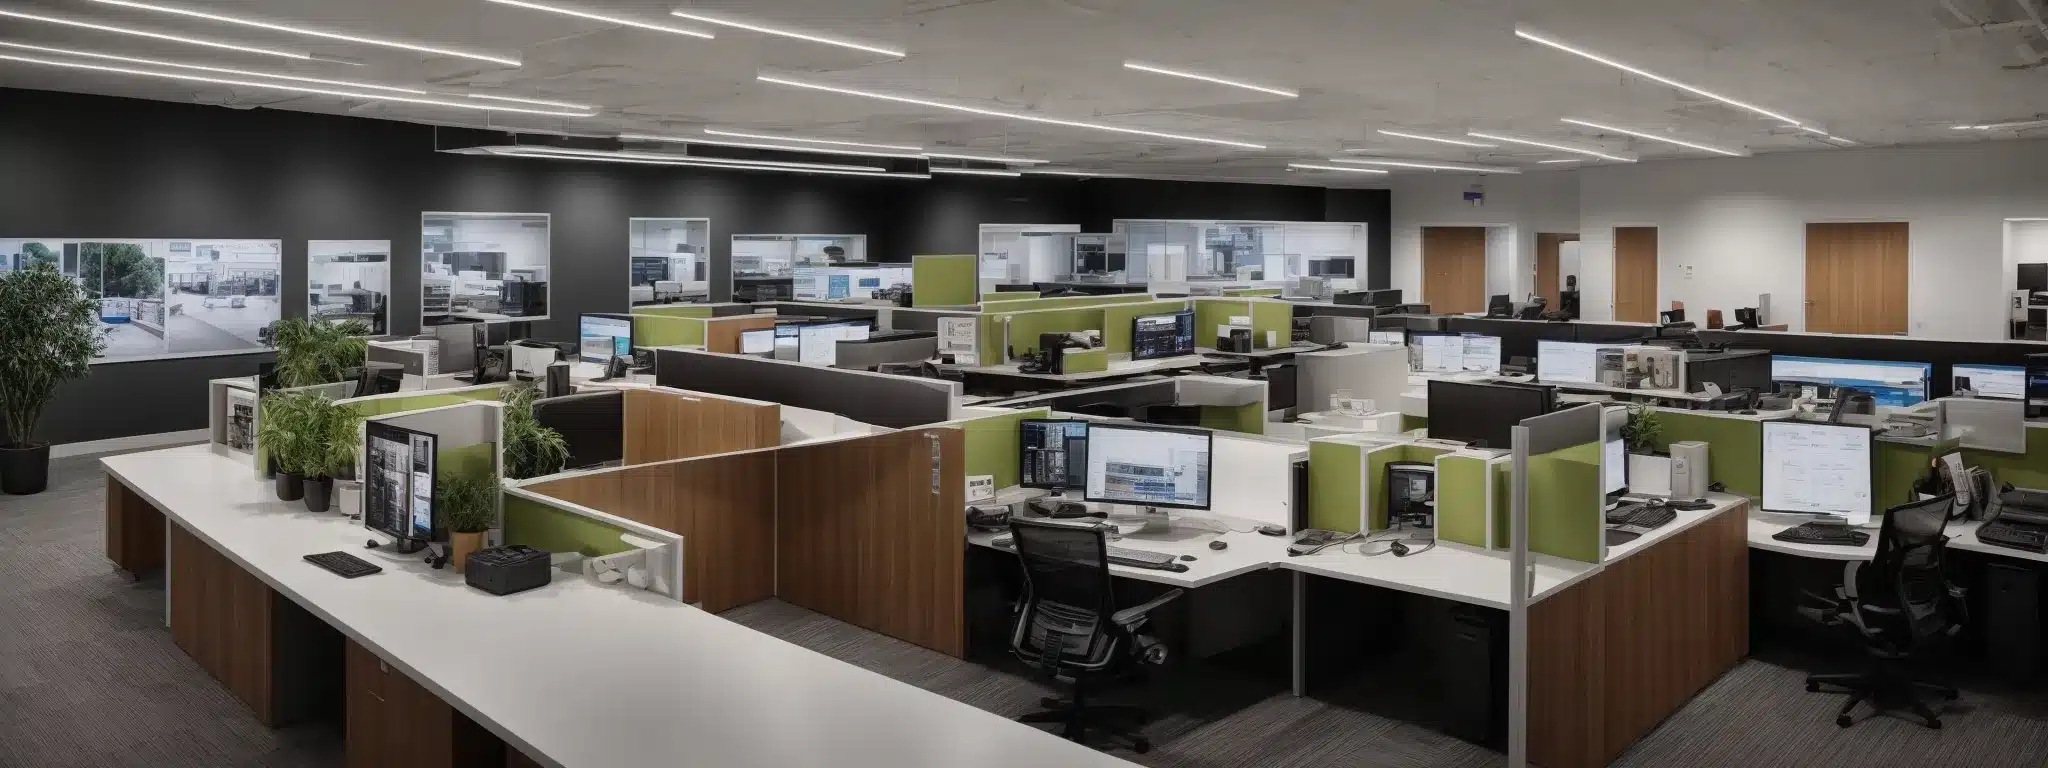 Visualize A Bustling Marketing Agency Office With An Open-Space Layout, Where A Central, Prominent Computer Screen Displays An Active Crm Dashboard Coordinating Workflows And Client Strategies.